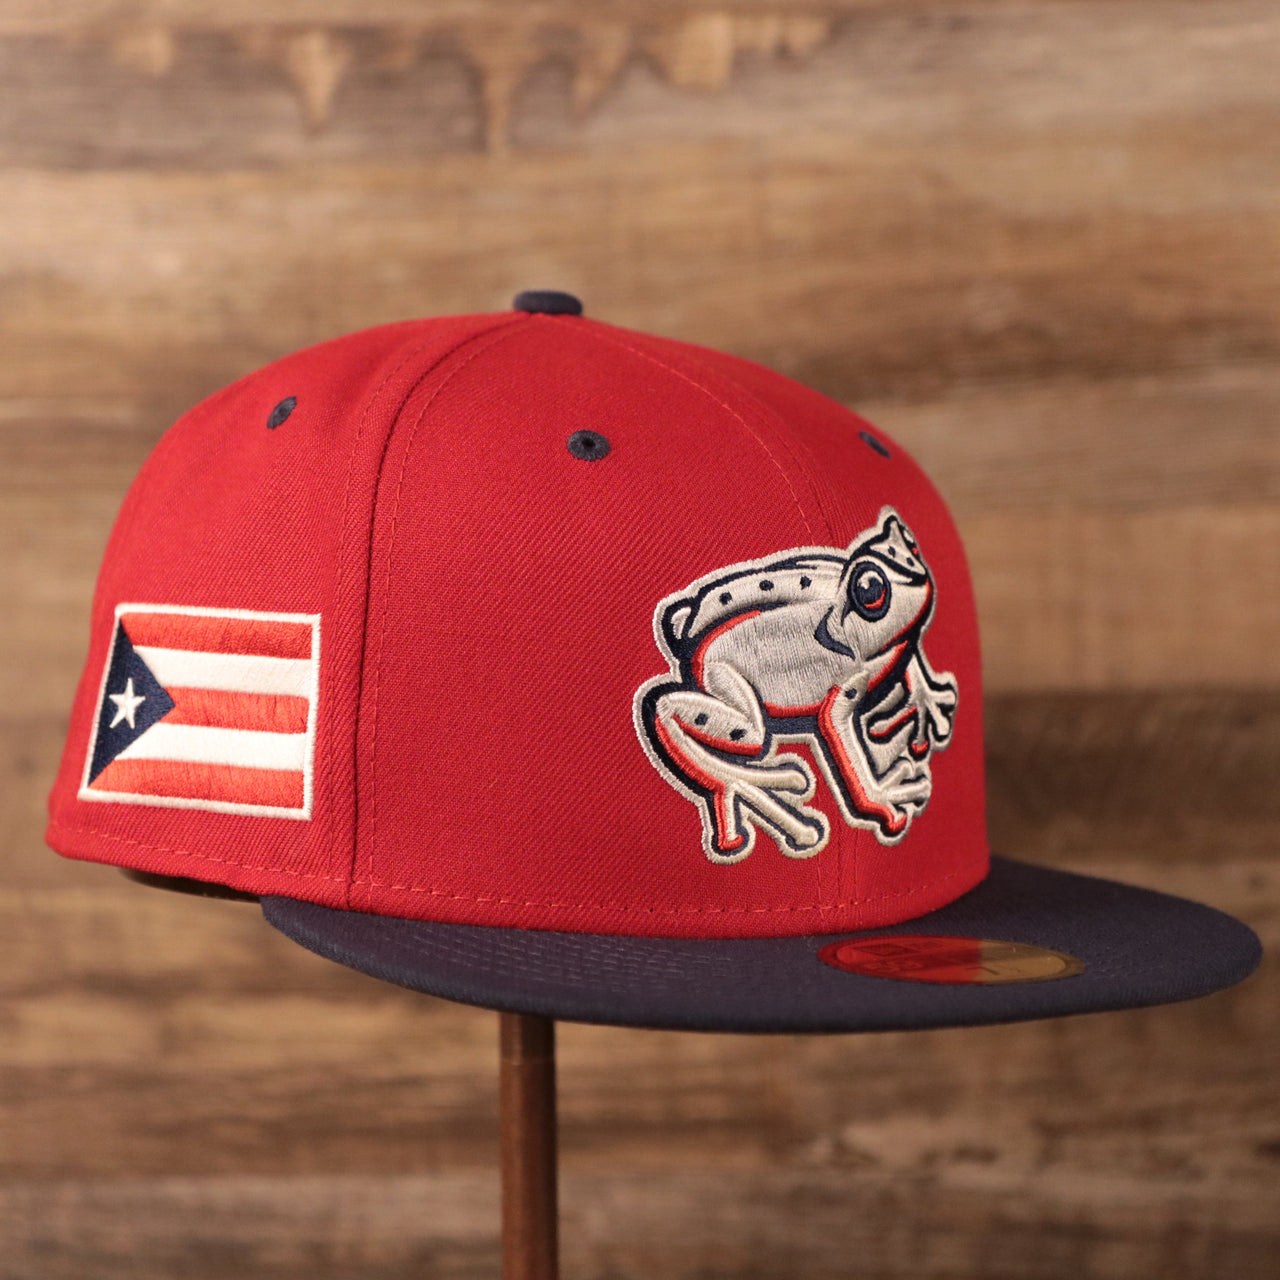 The coquis frog logo on the front of the red hispanic minor league fitted cap by New Era.